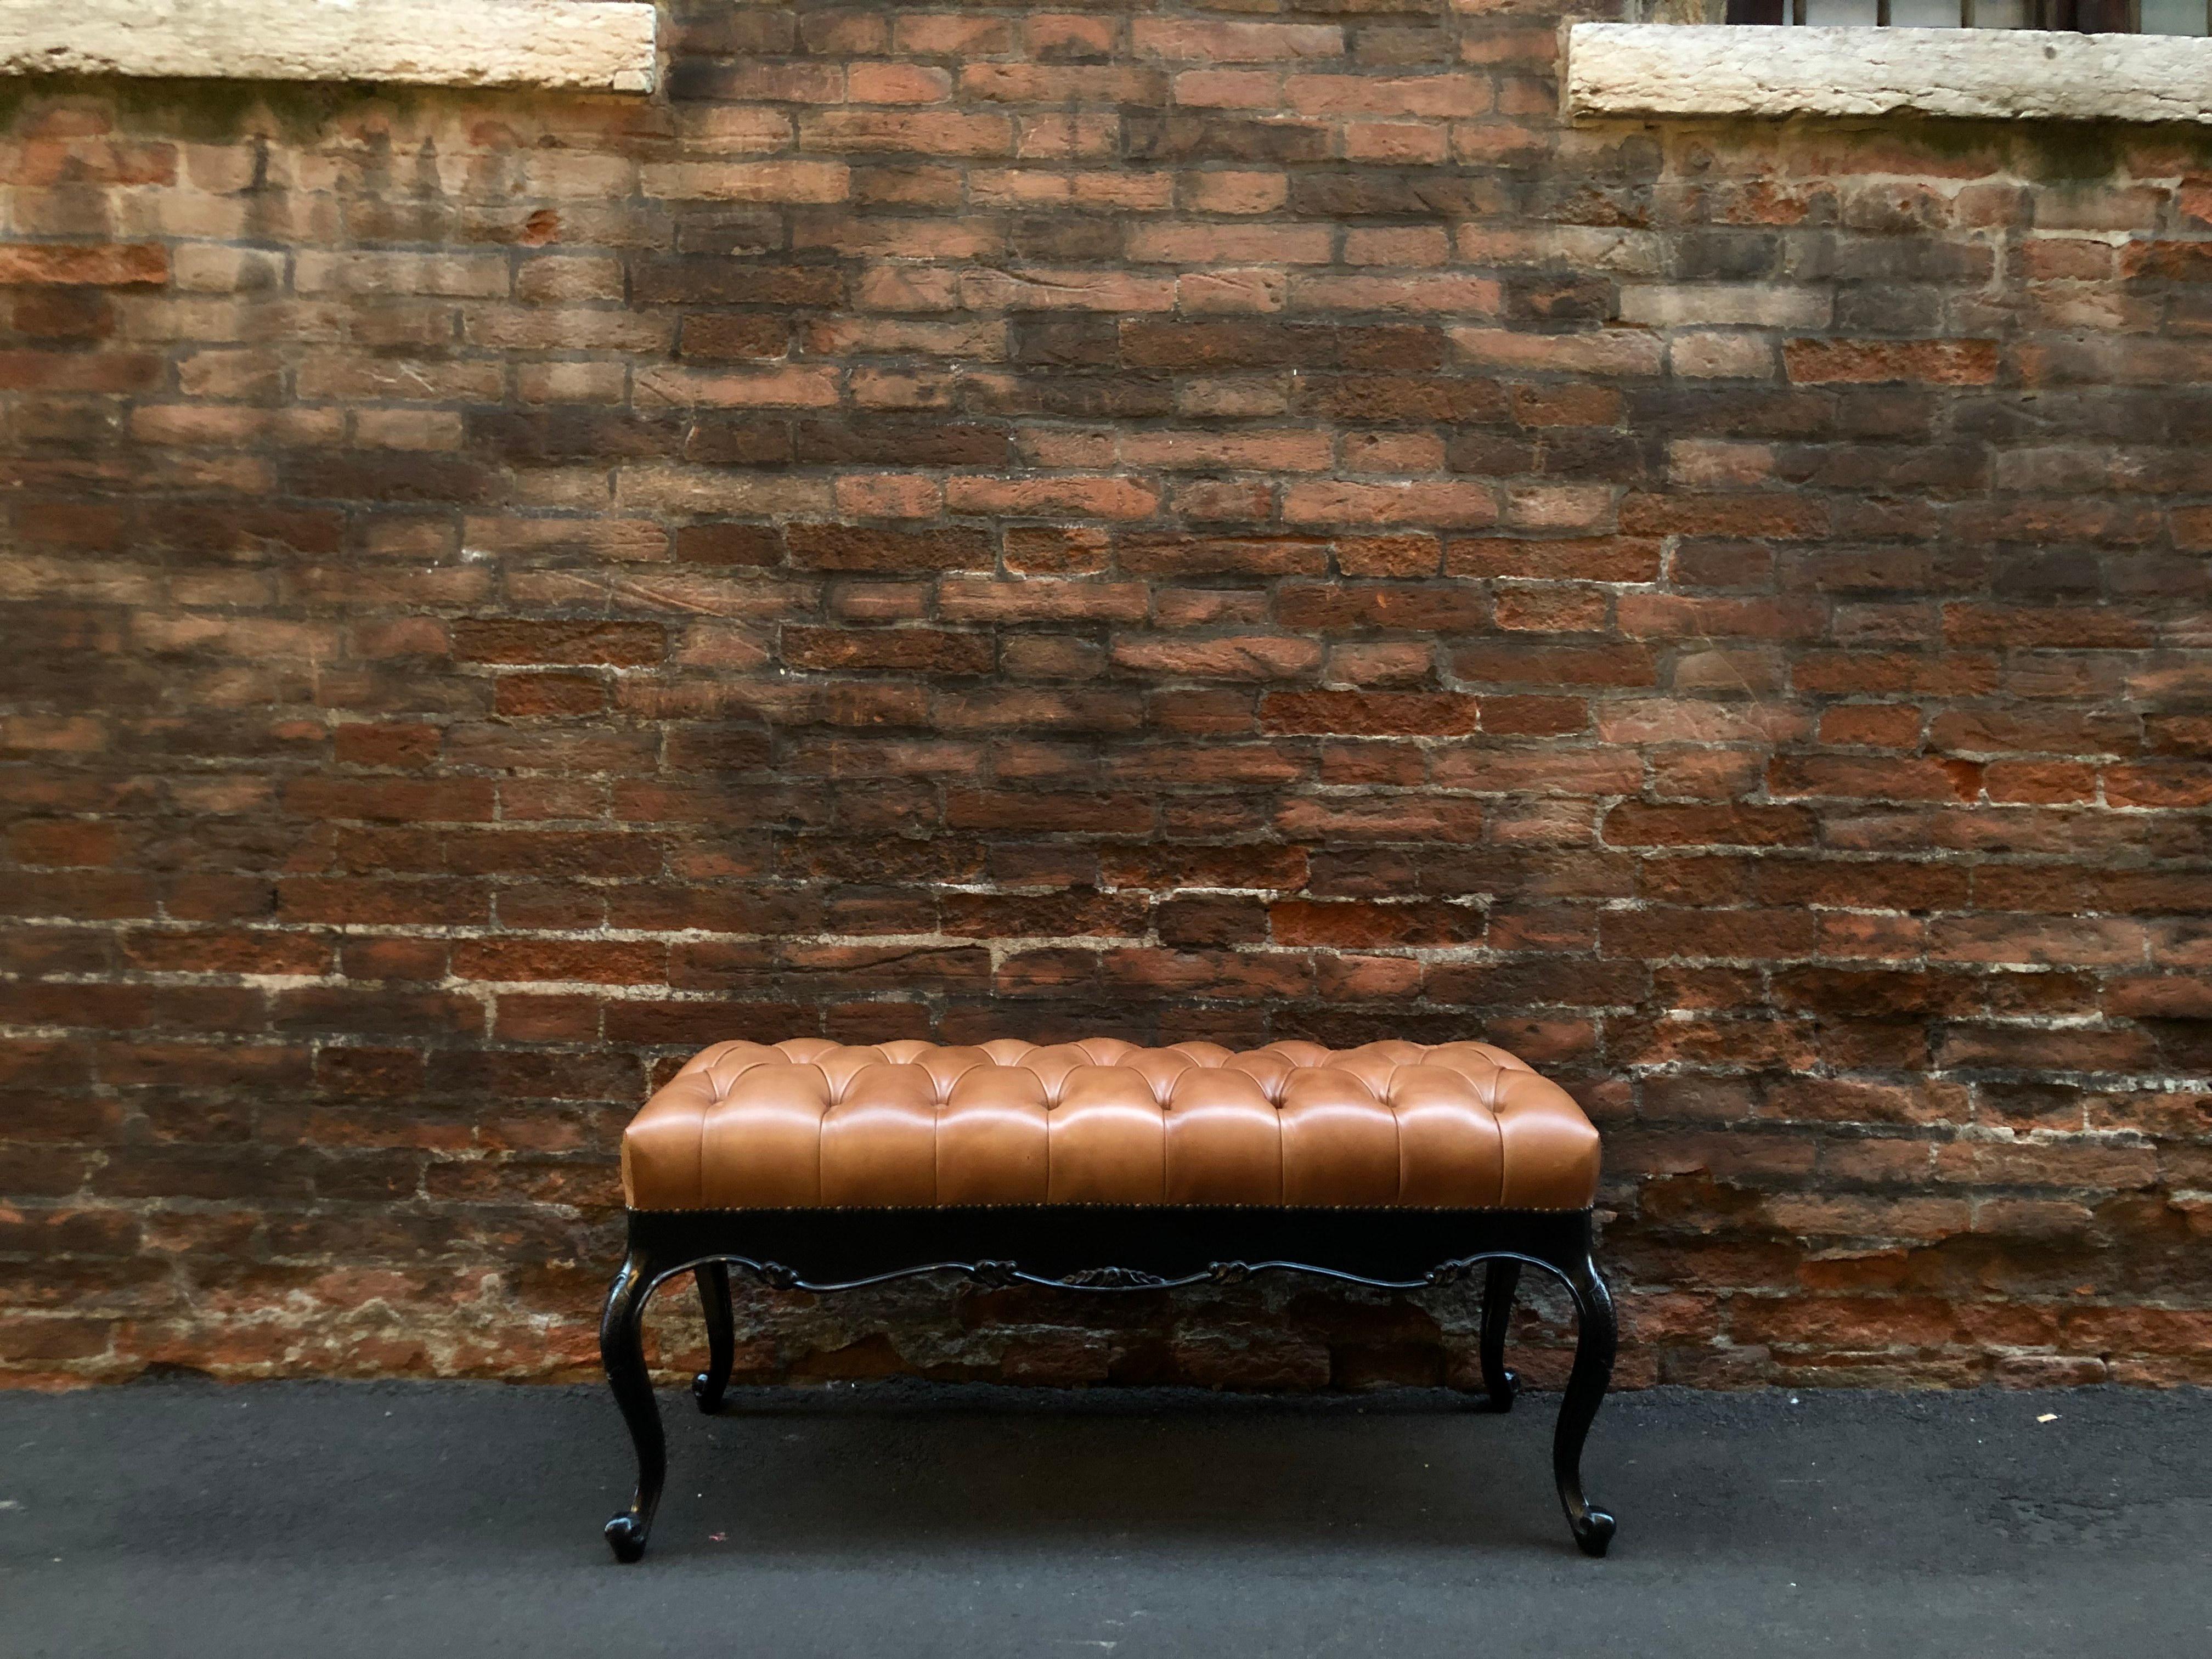 Midcentury Italian black lacquered engraved wood Tobacco leather Bench. From Italy, from 1950s.
Ideal as bench along a corridor, at the end of a bed, at the entrance.
Excellent conditions. Wooden part restored in conservative way, reupholstered